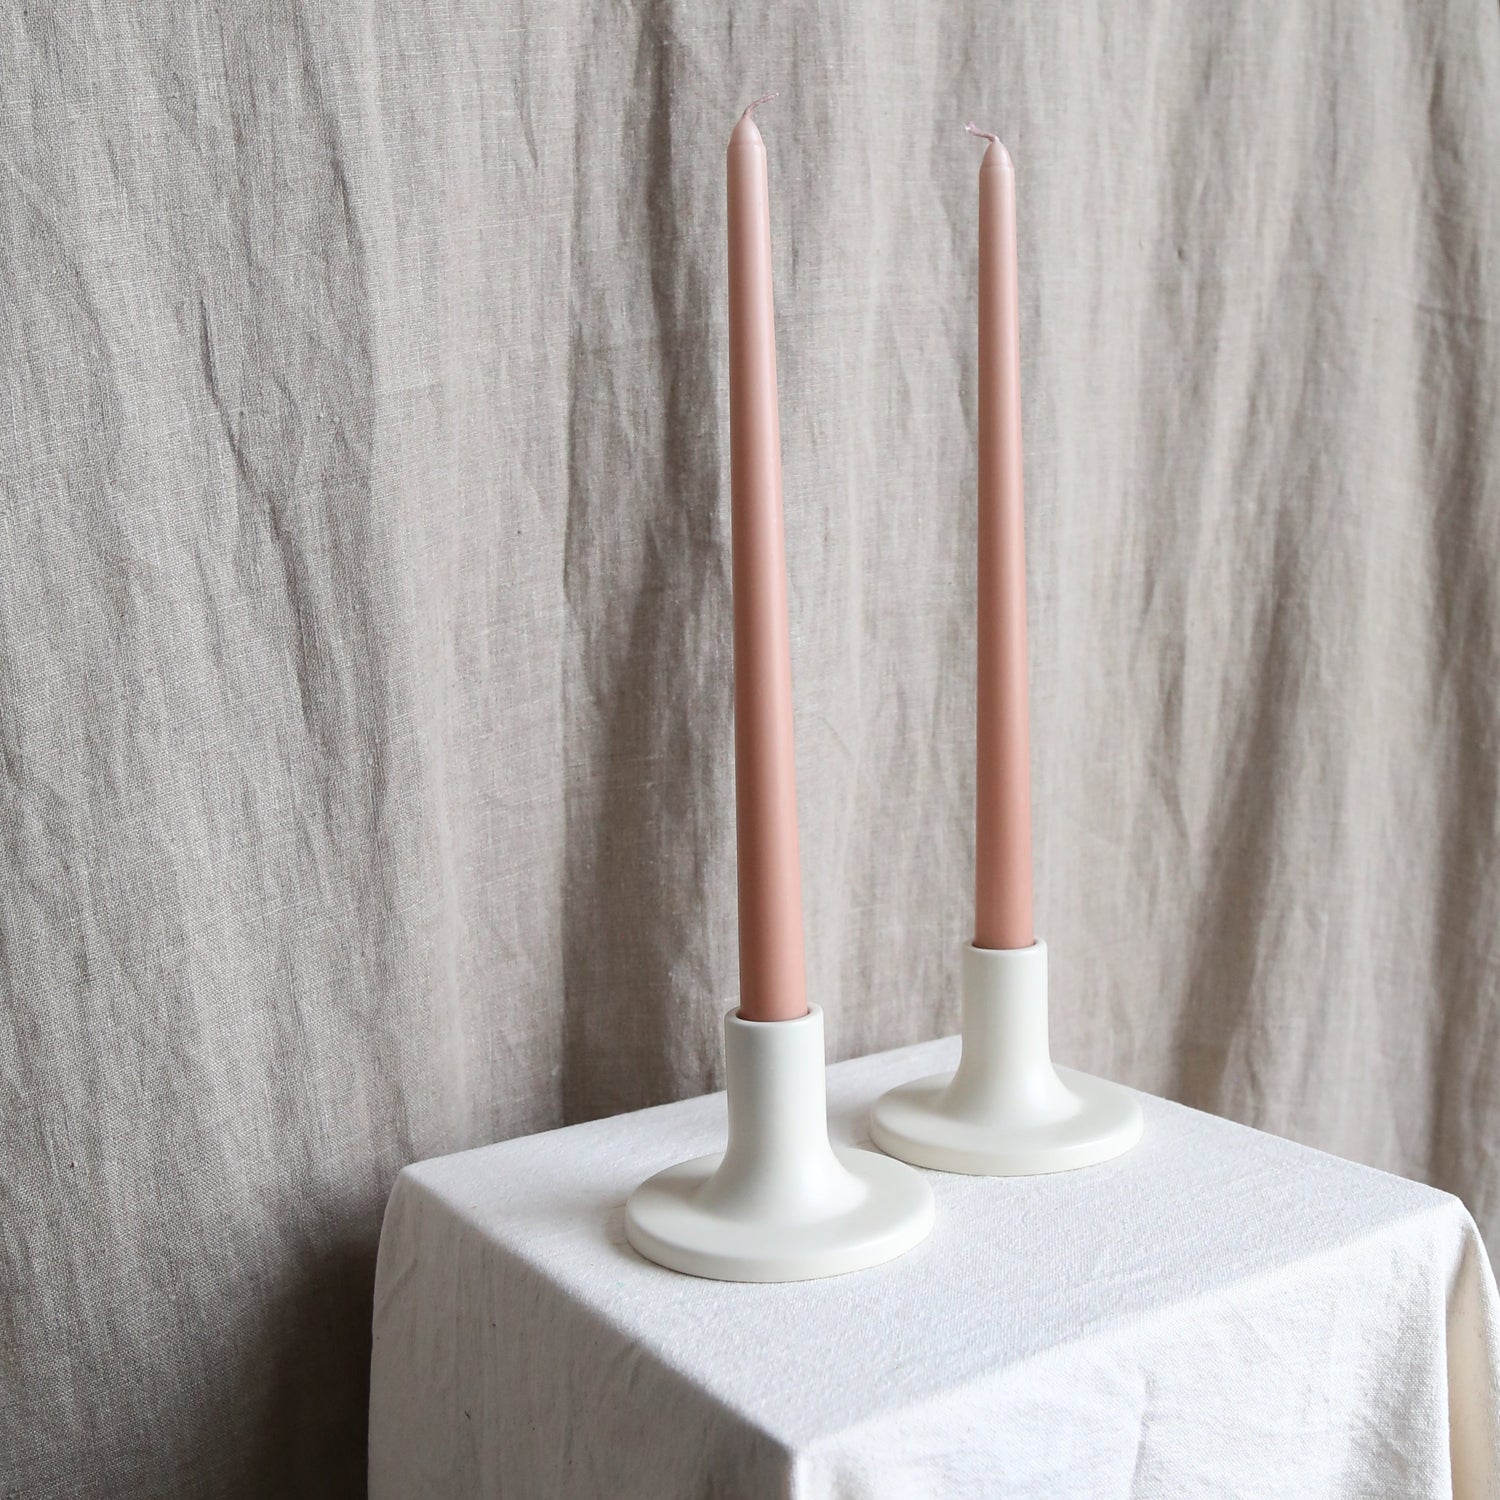 Pair of peach taper candles in white holders available at Rook & Rose.